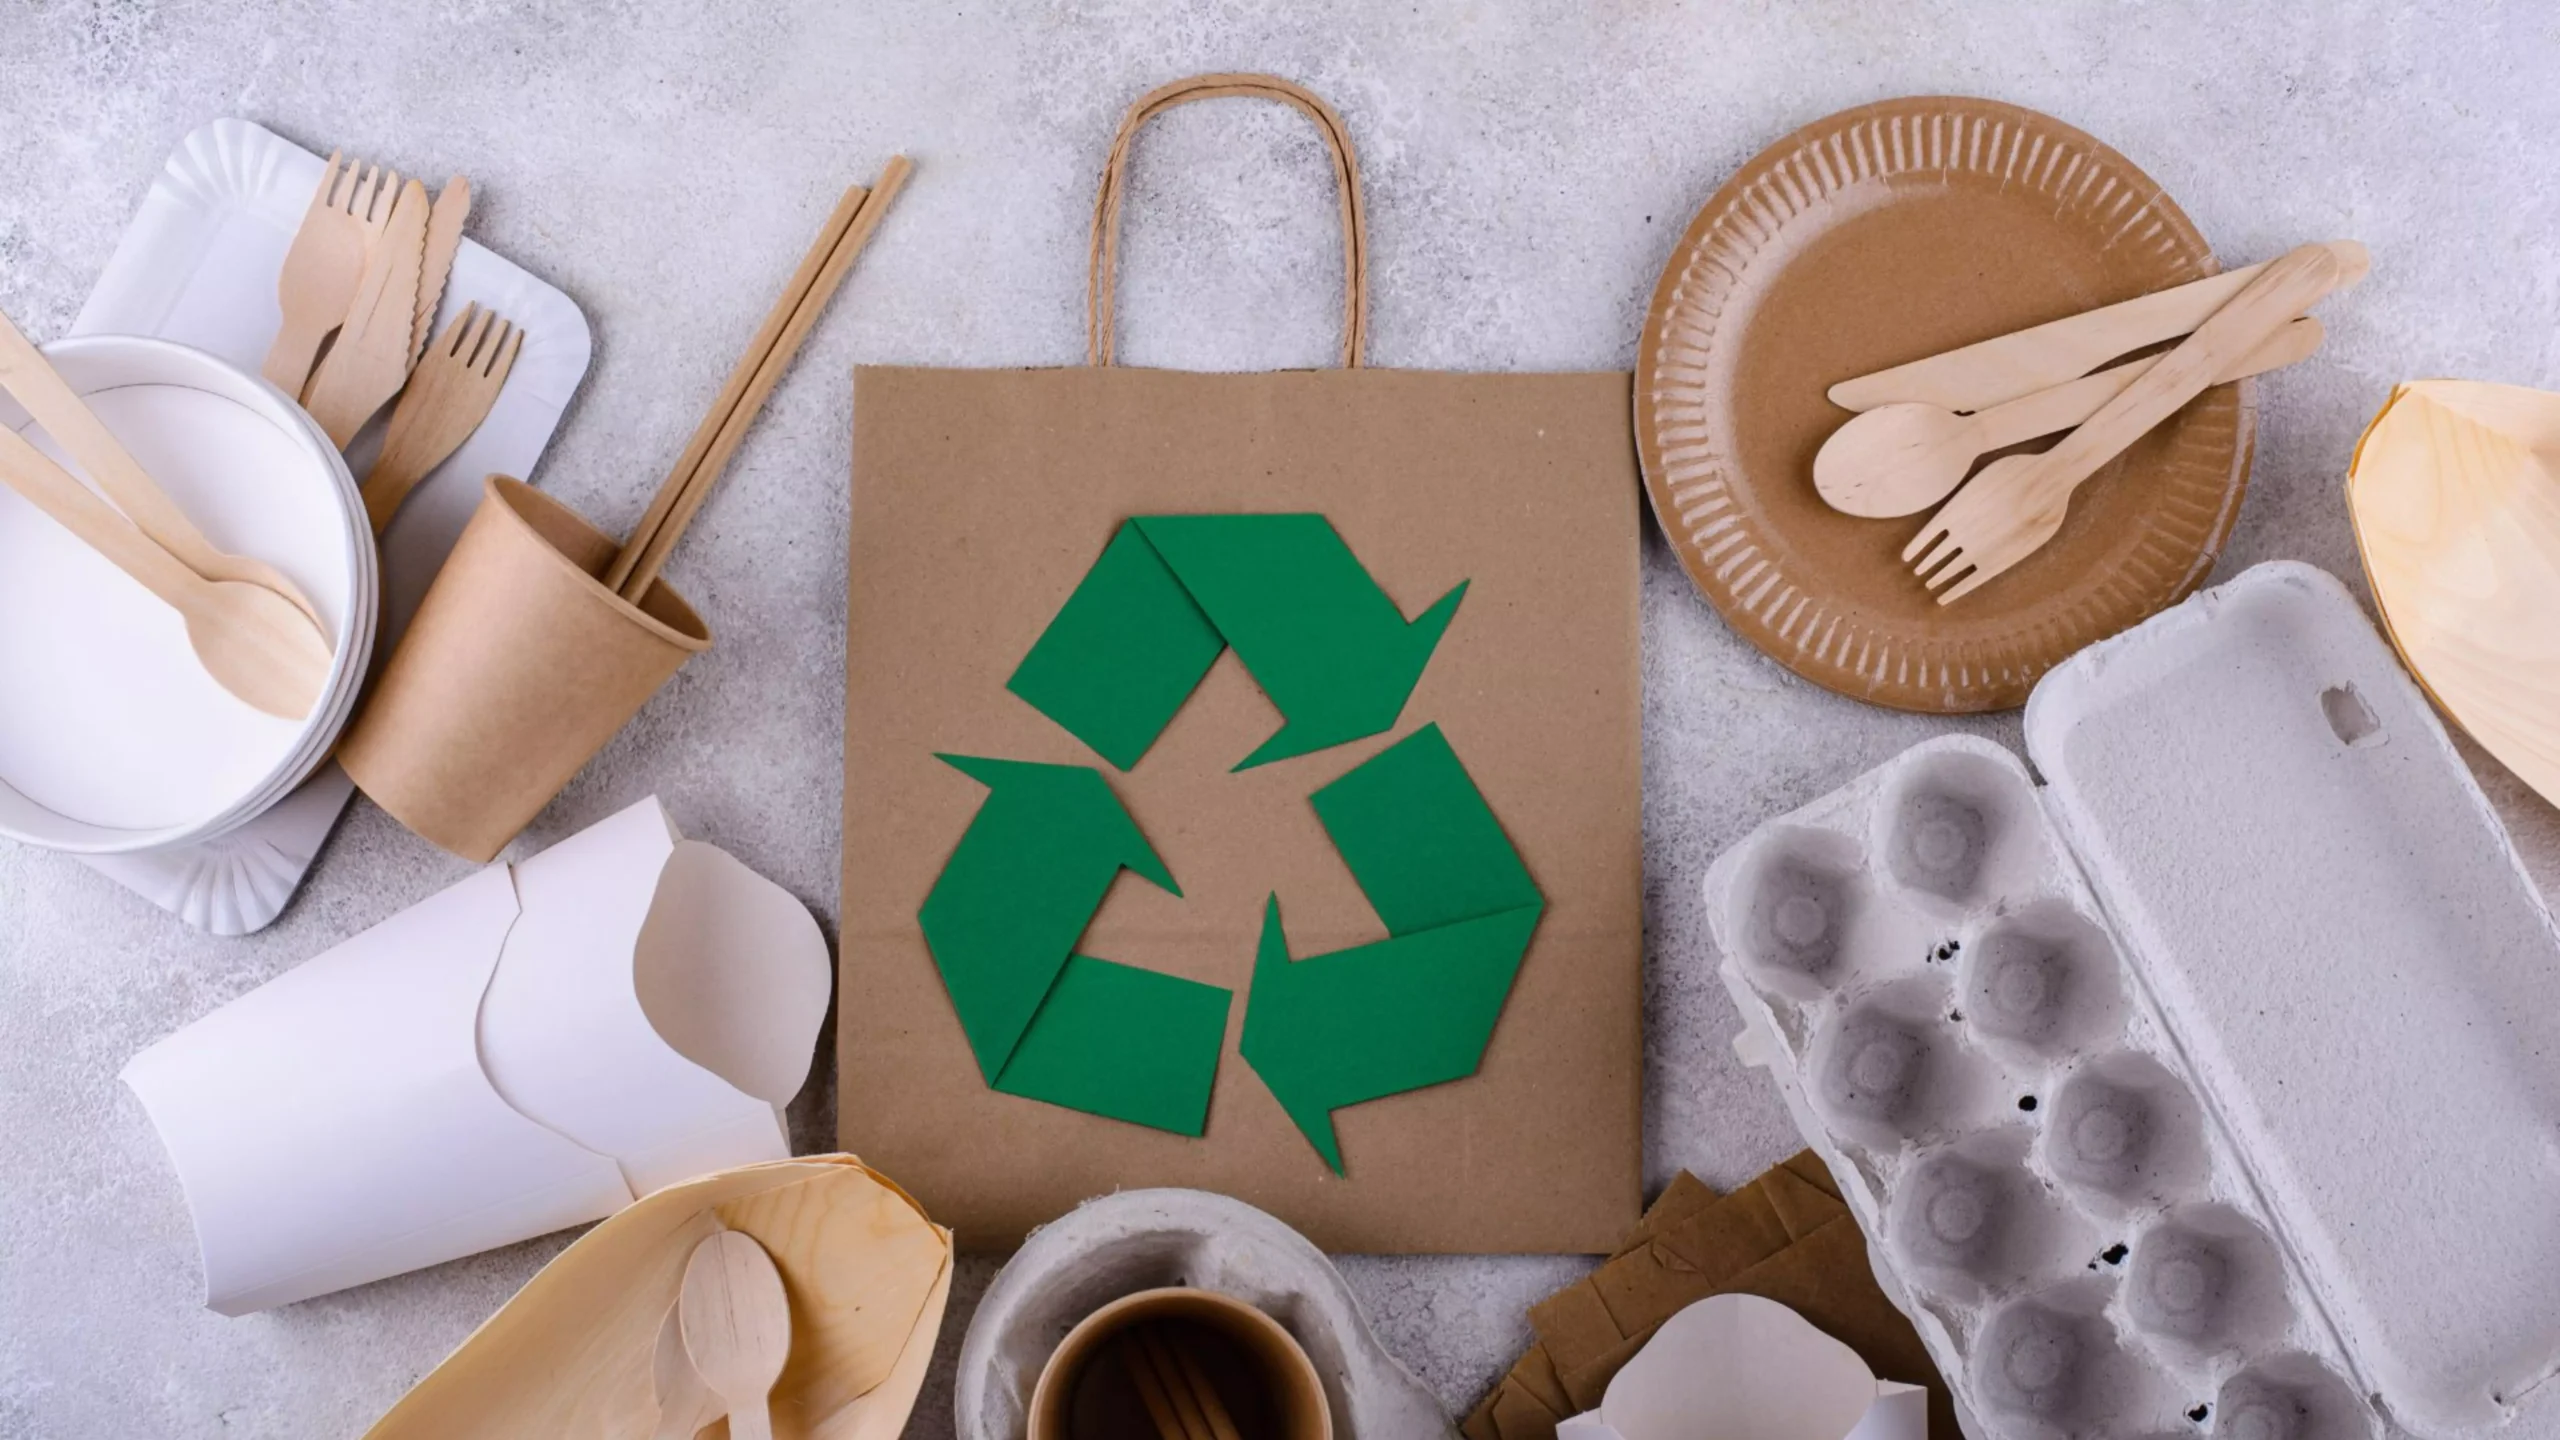 Transition to Eco-Friendly Boxes